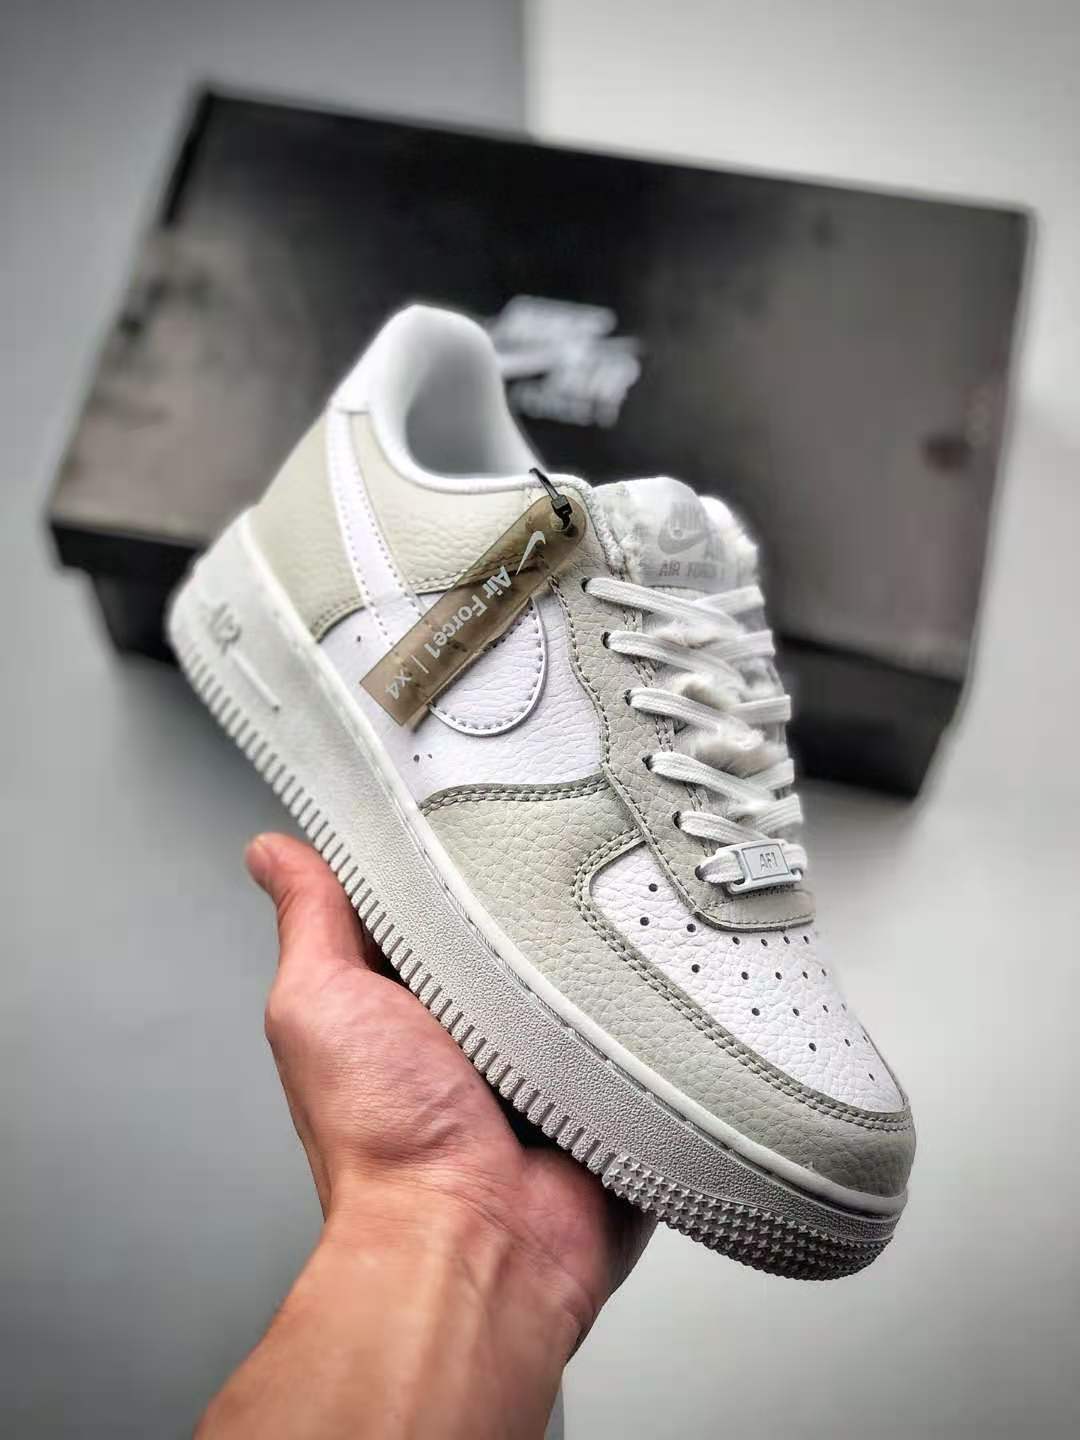 Nike Air Force 1 '07 Low 'Light Bone' DC1165-001 - Stylish and Comfortable Sneakers